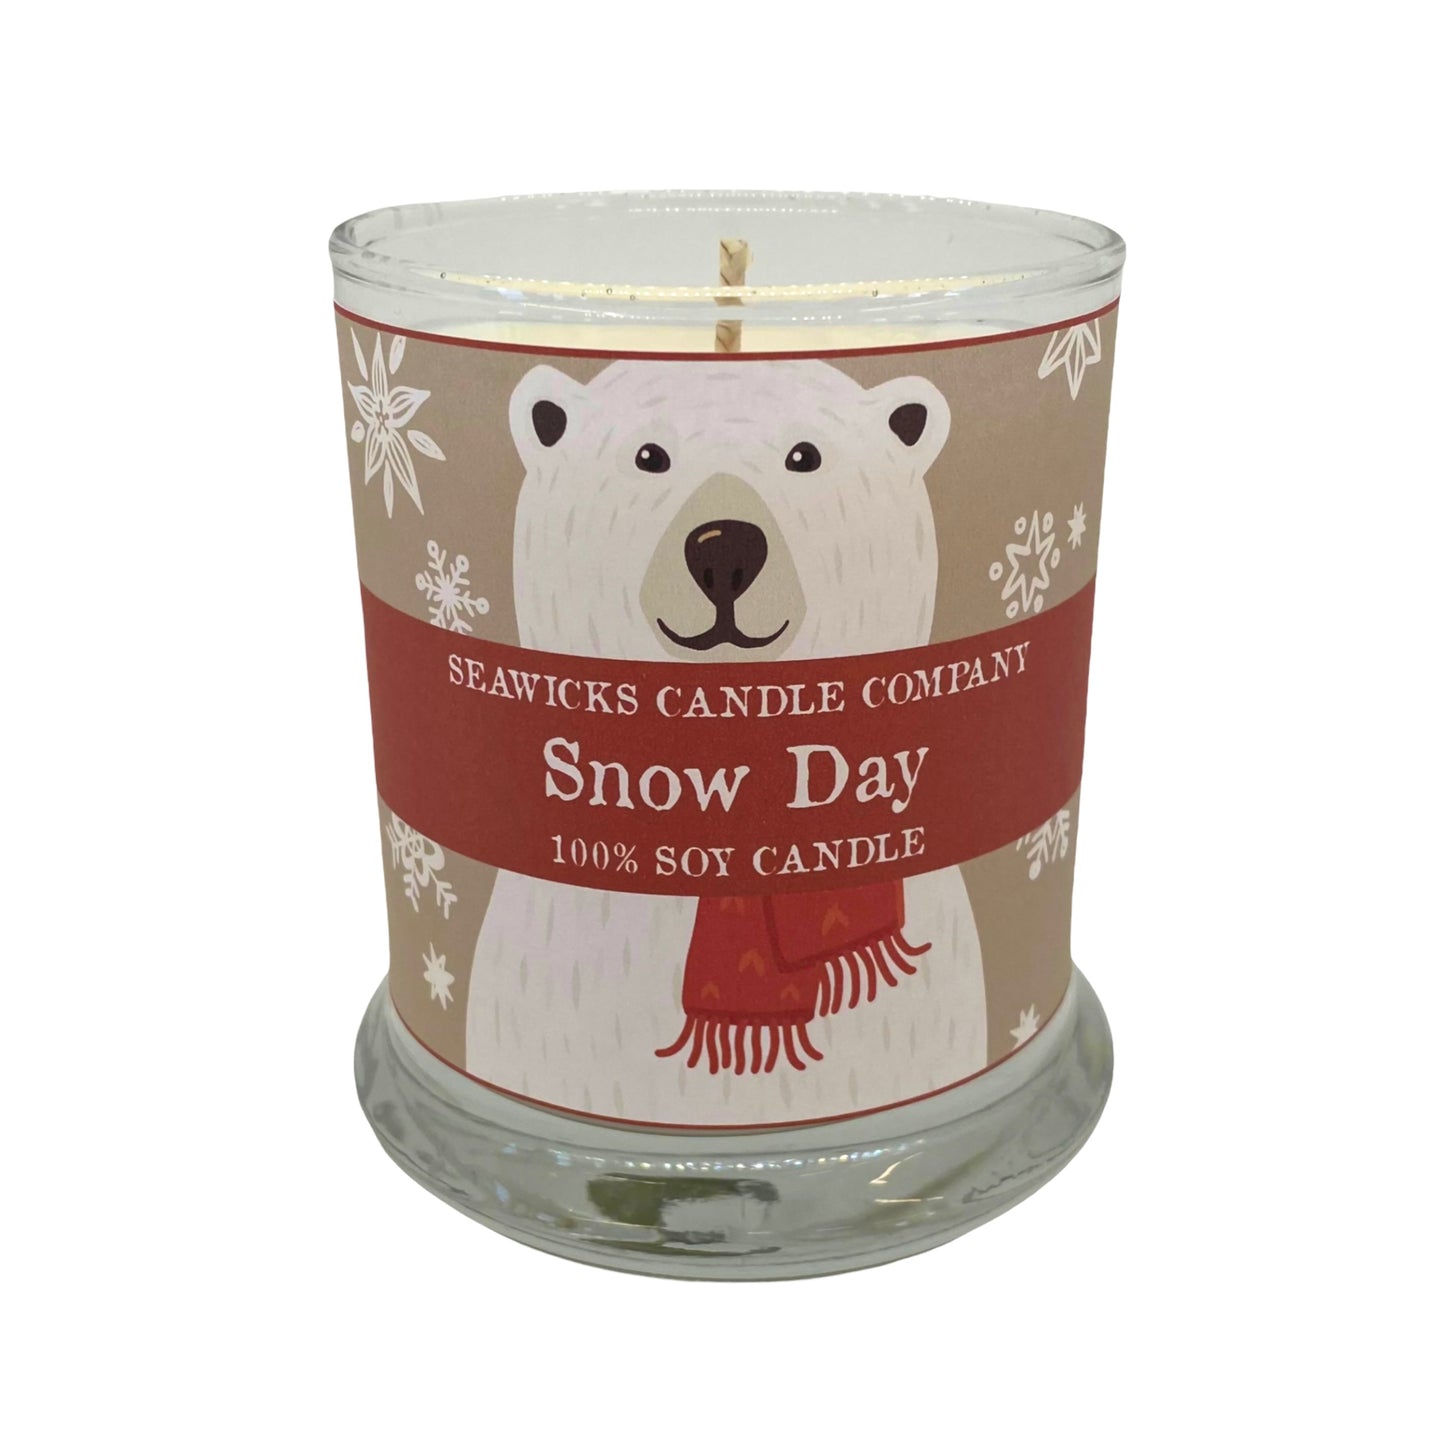 Snow Day 100% Soy Candle